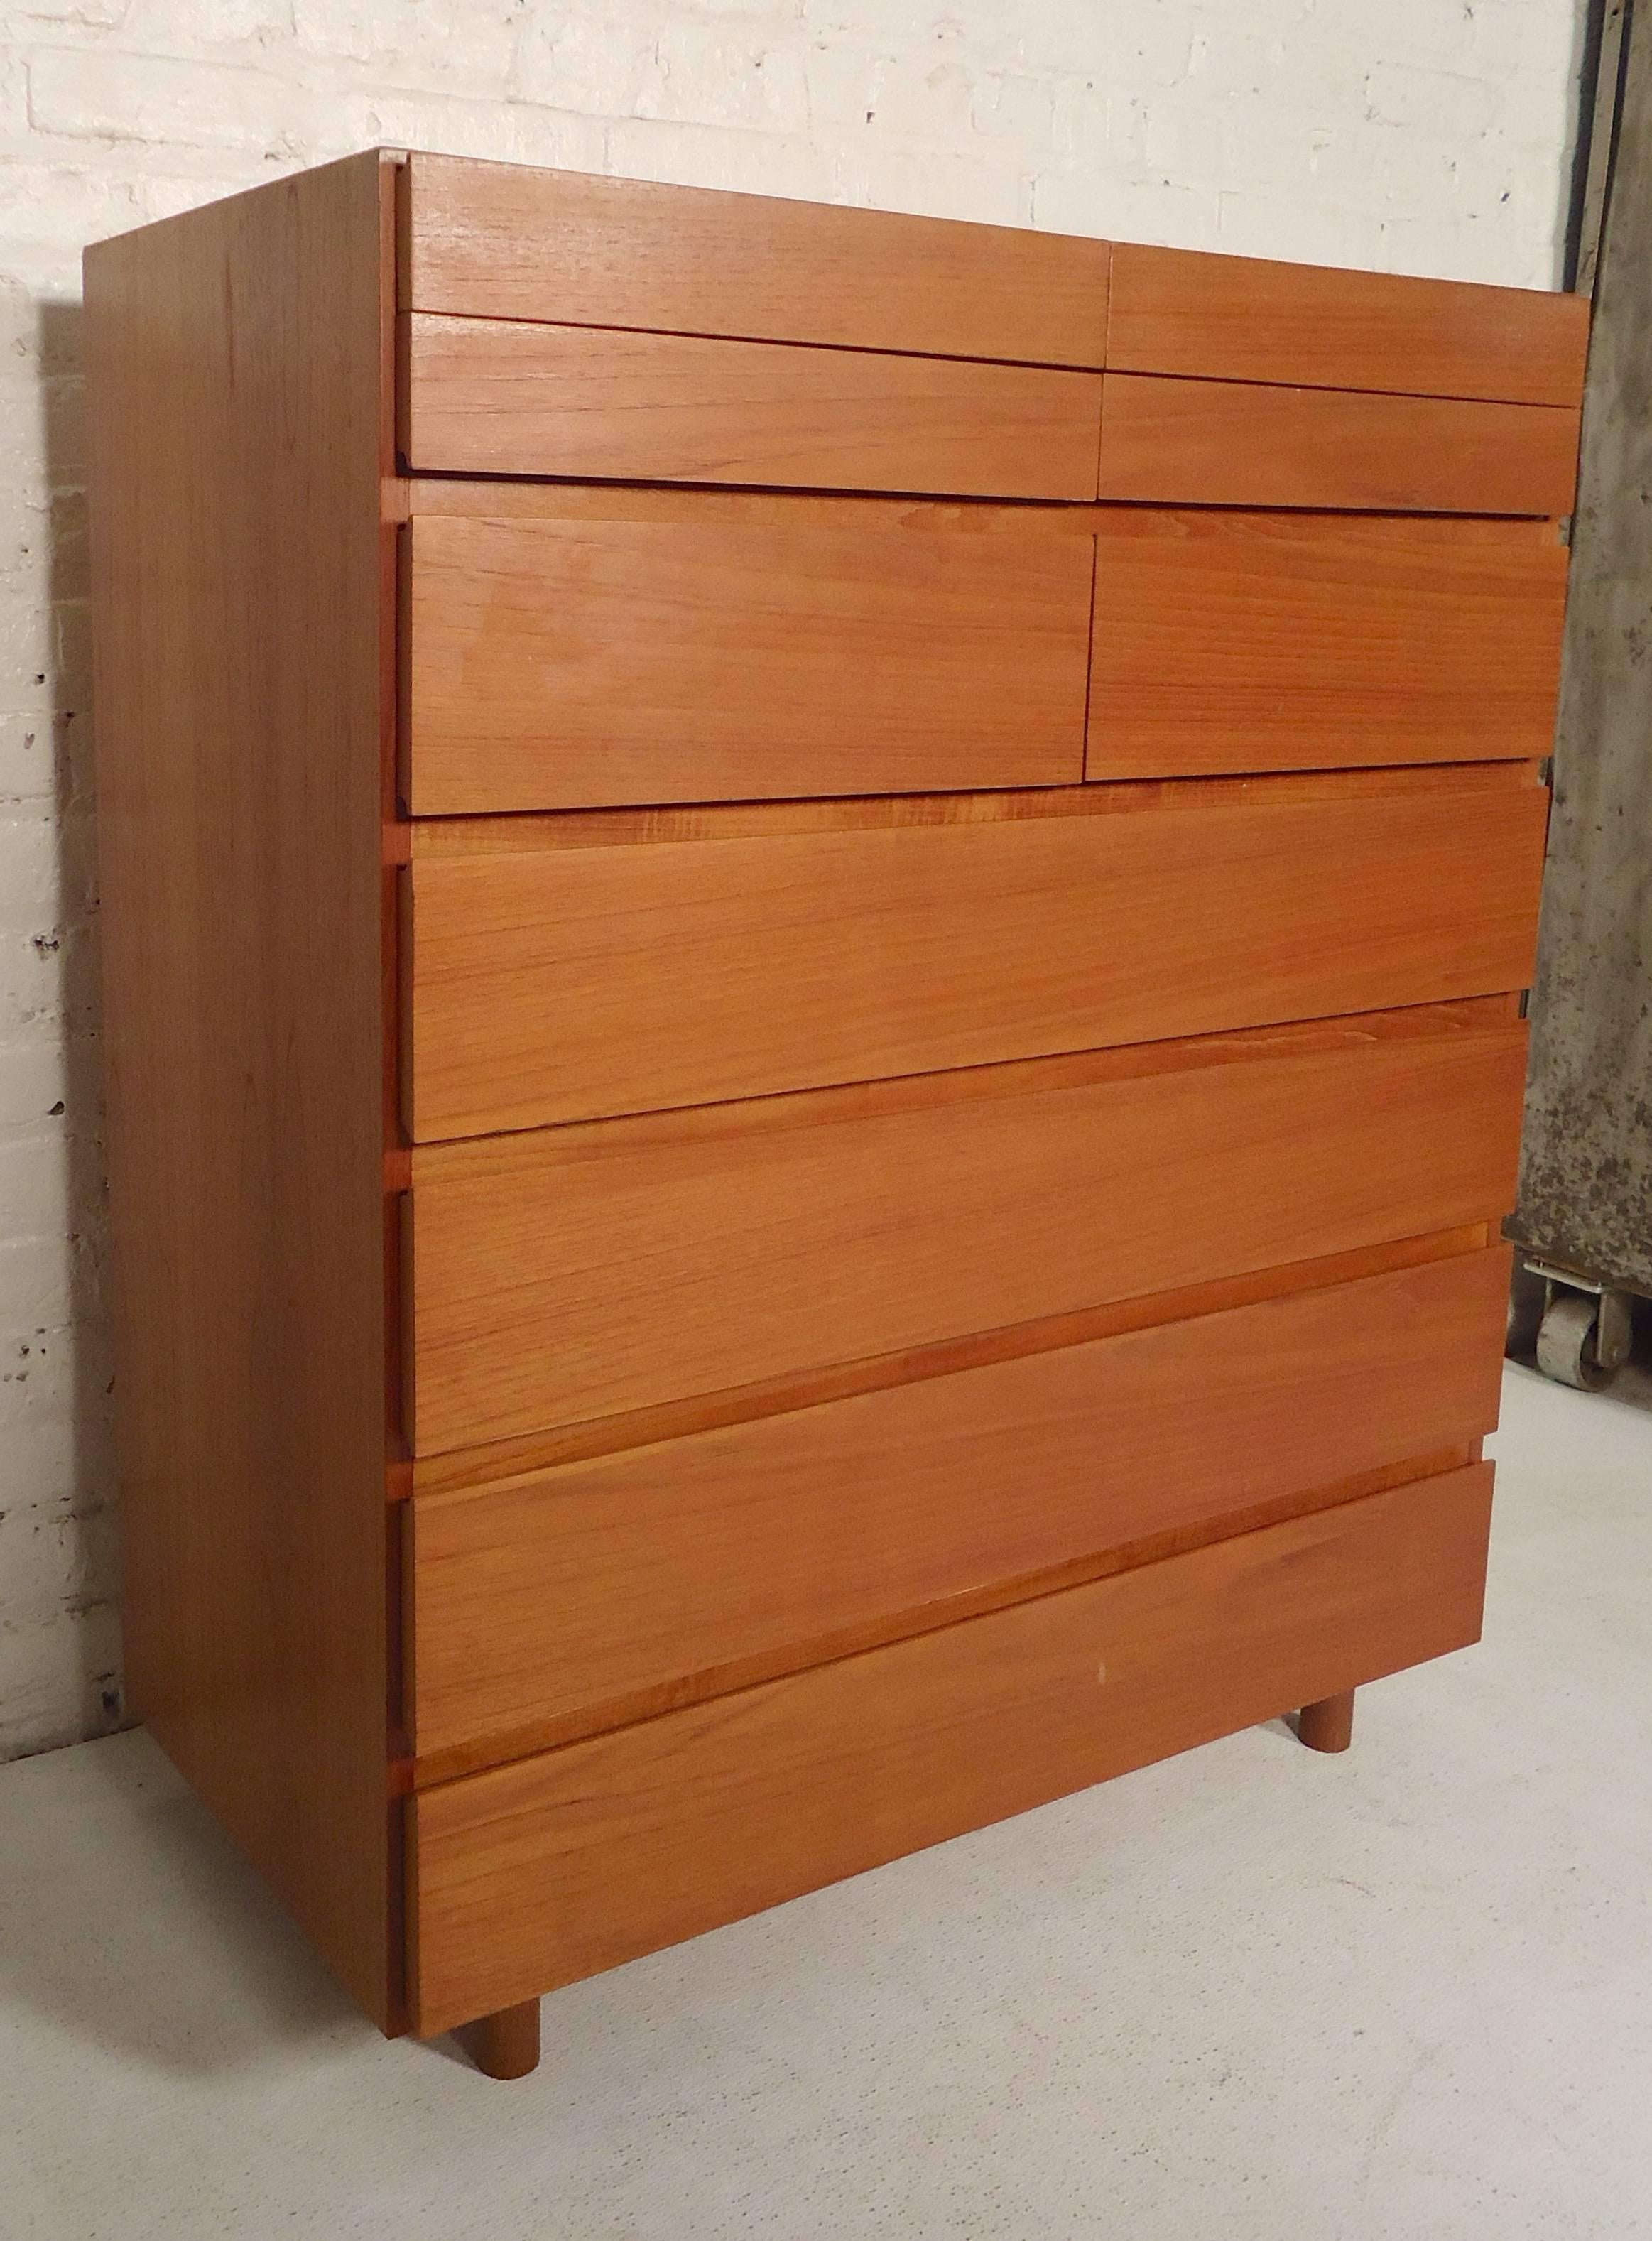 Mid-Century Modern chest of drawers in teak grain wood. Ten total drawers with simple lines and modern style.

(Please confirm item location - NY or NJ - with dealer).
 